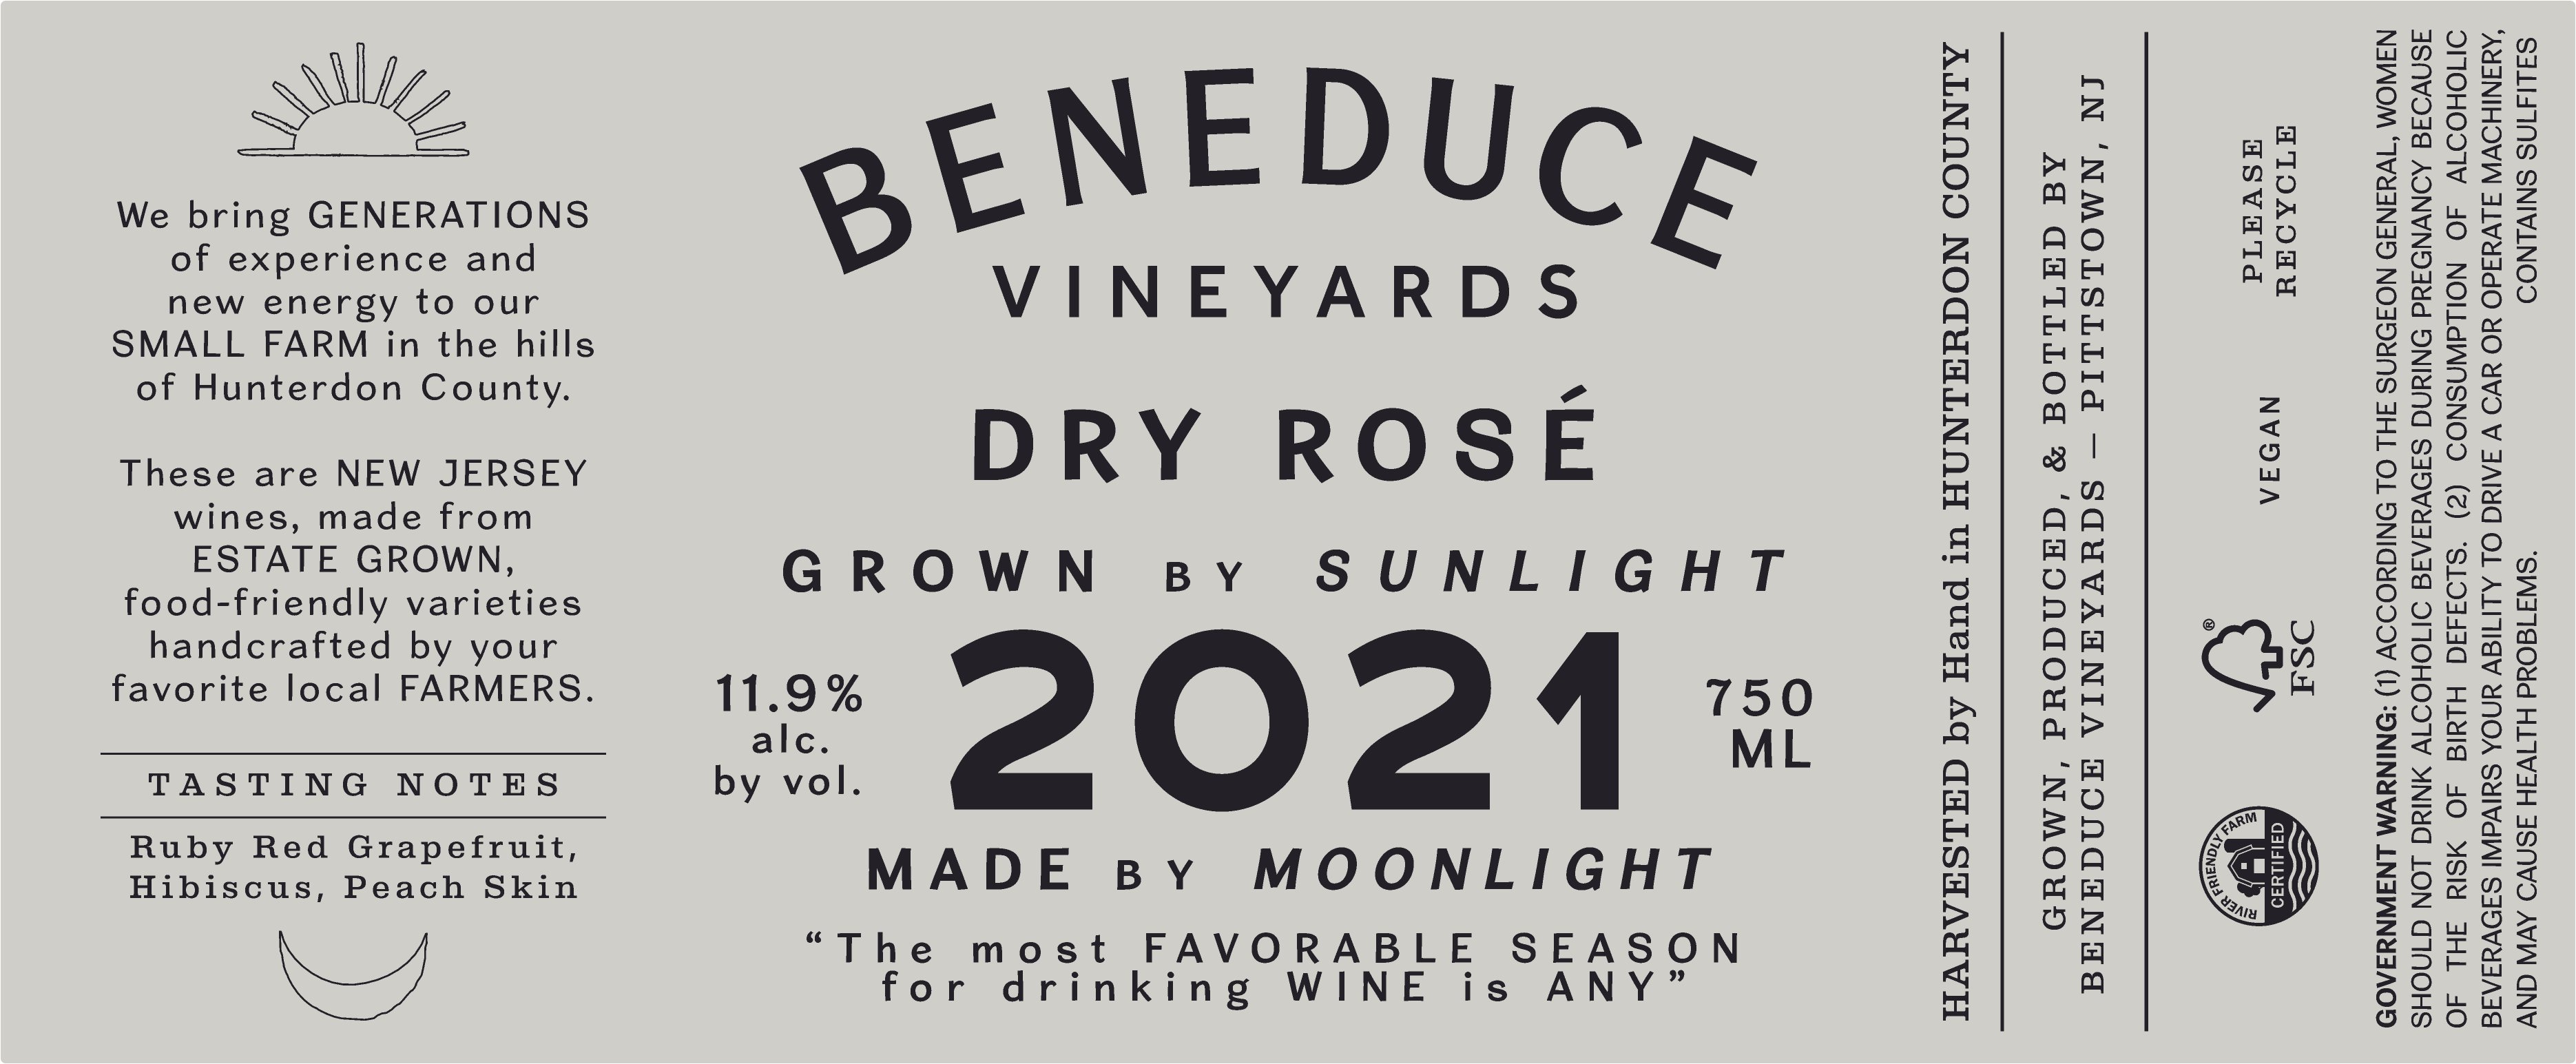 Product Image for 2021 Dry Rosé